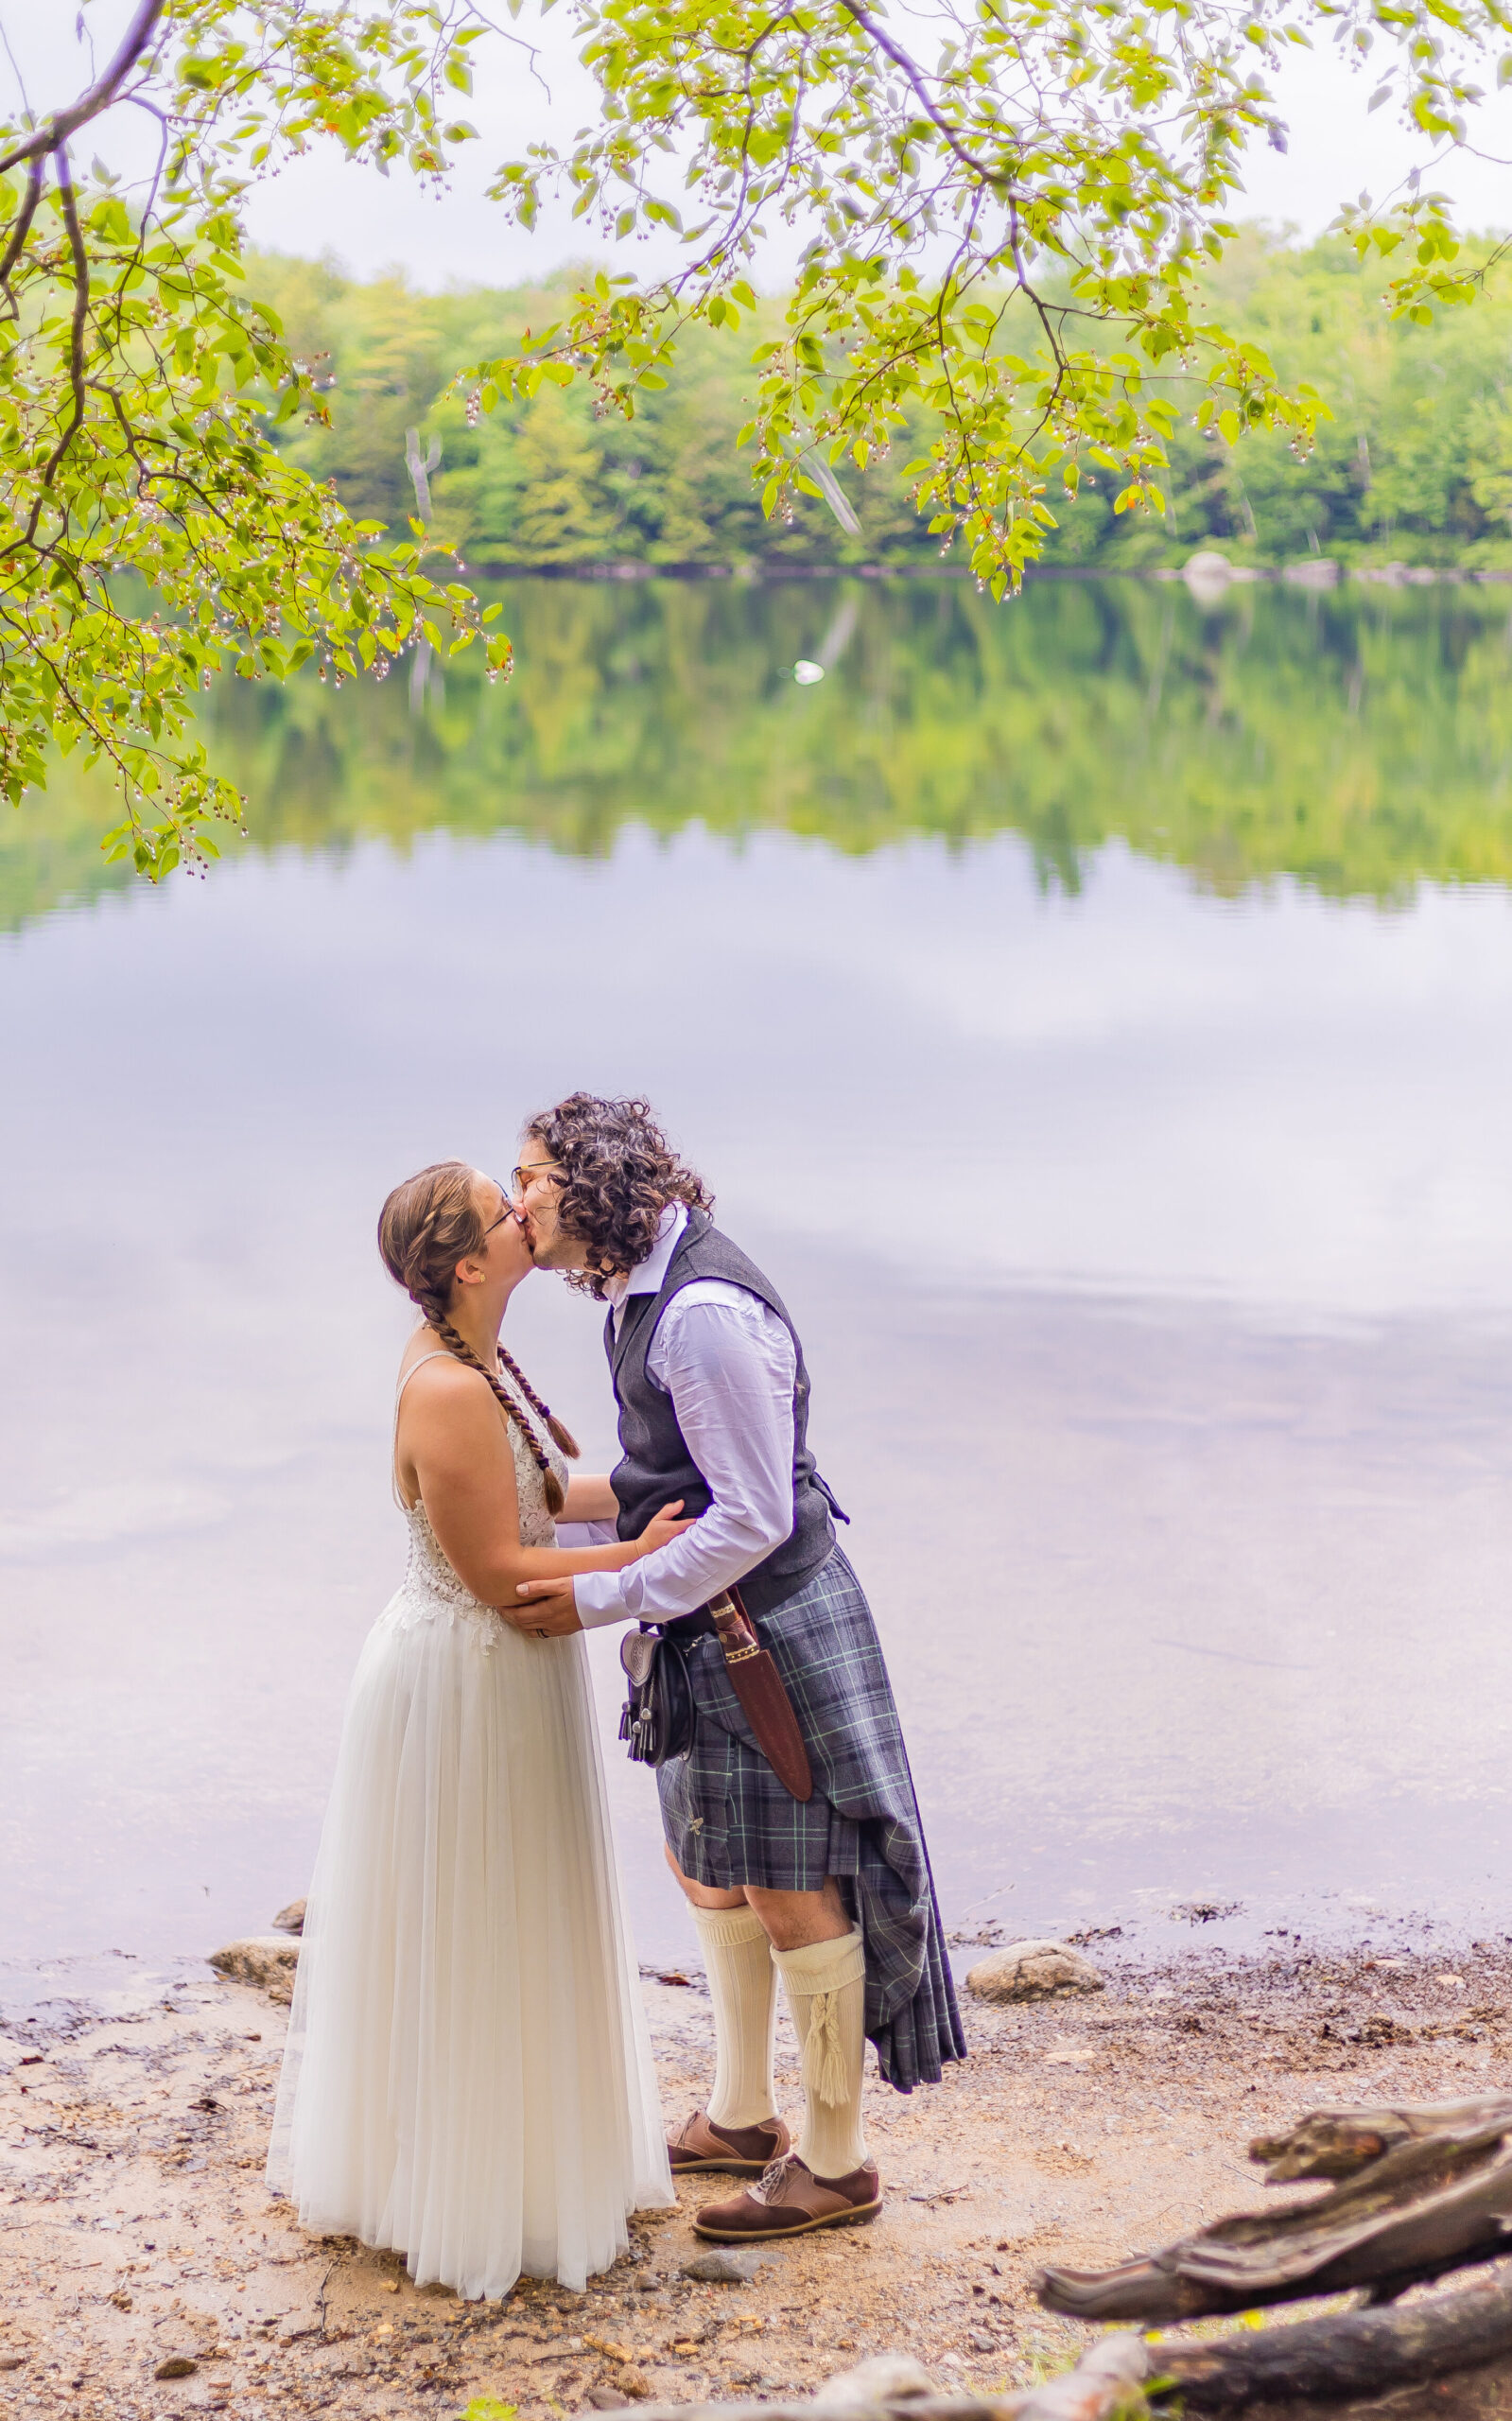 The bride and groom share a kiss in front of Russell Pond in Franconia Notch.